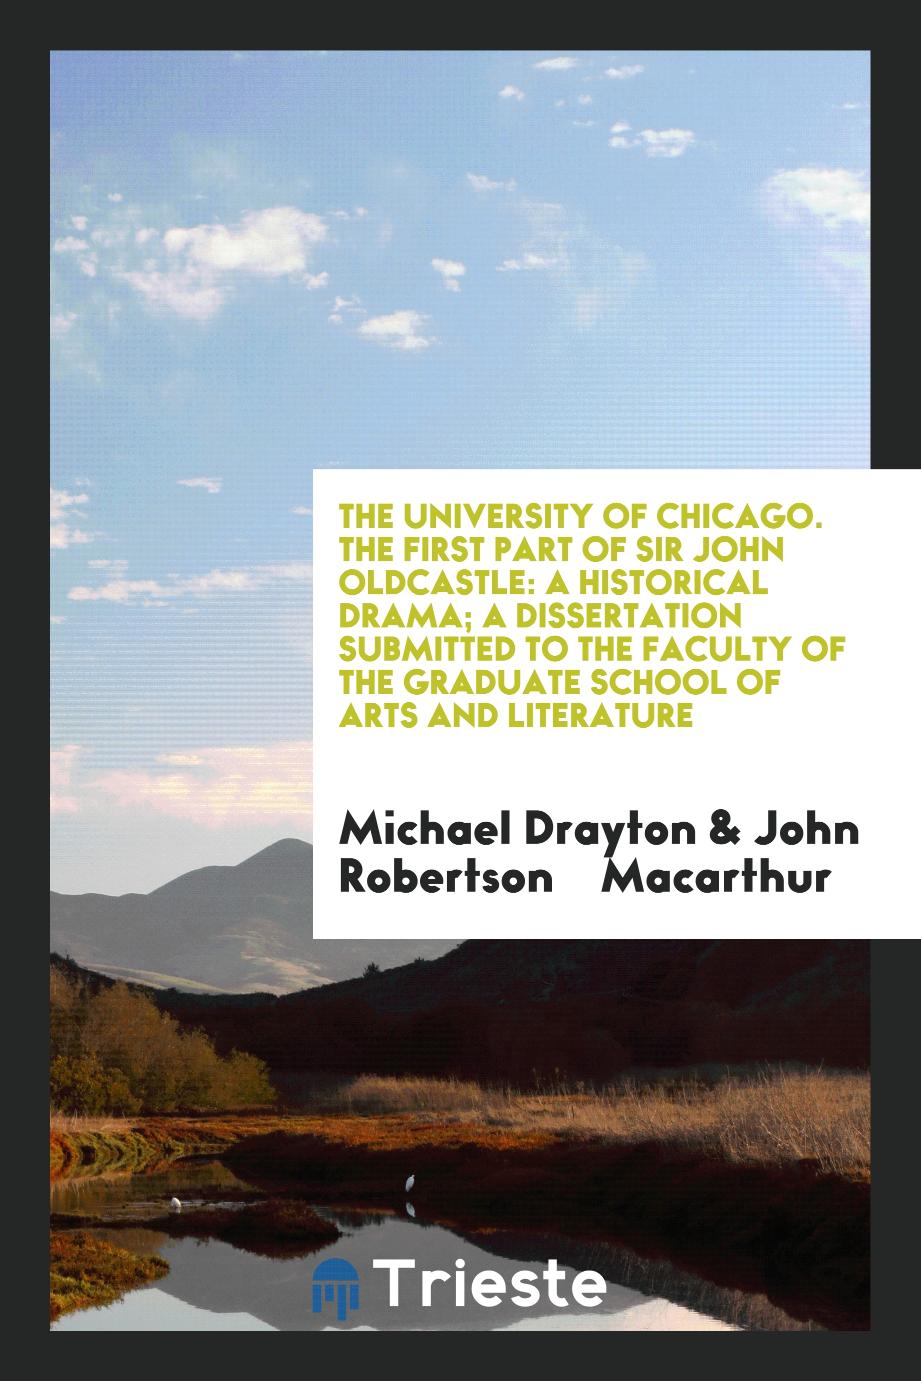 The University of Chicago. The First Part of Sir John Oldcastle: A Historical Drama; A Dissertation Submitted to the Faculty of the Graduate School of Arts and Literature